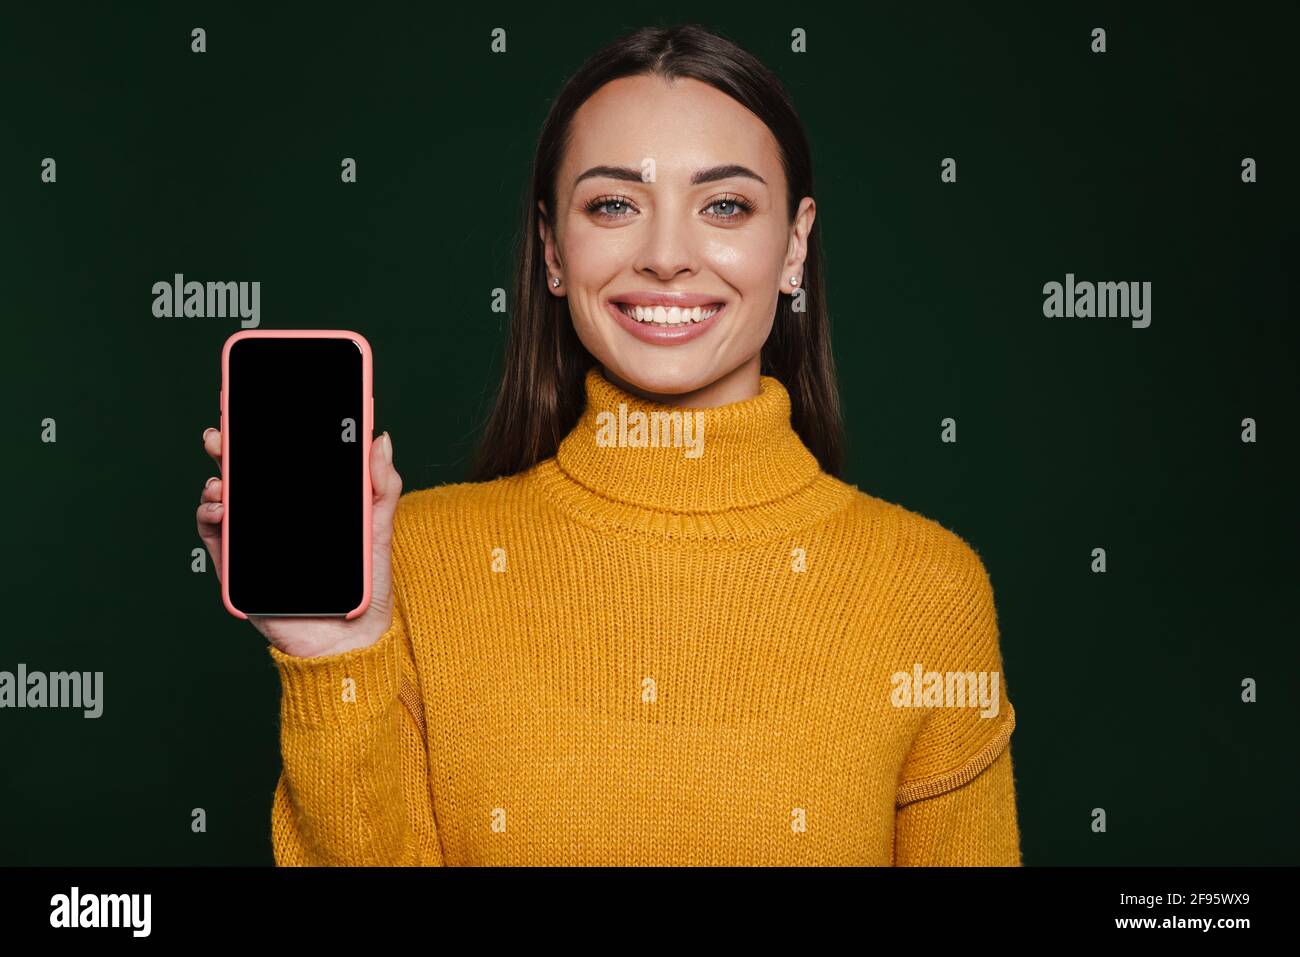 Joyful beautiful girl smiling and showing mobile phone isolated over green background Stock Photo